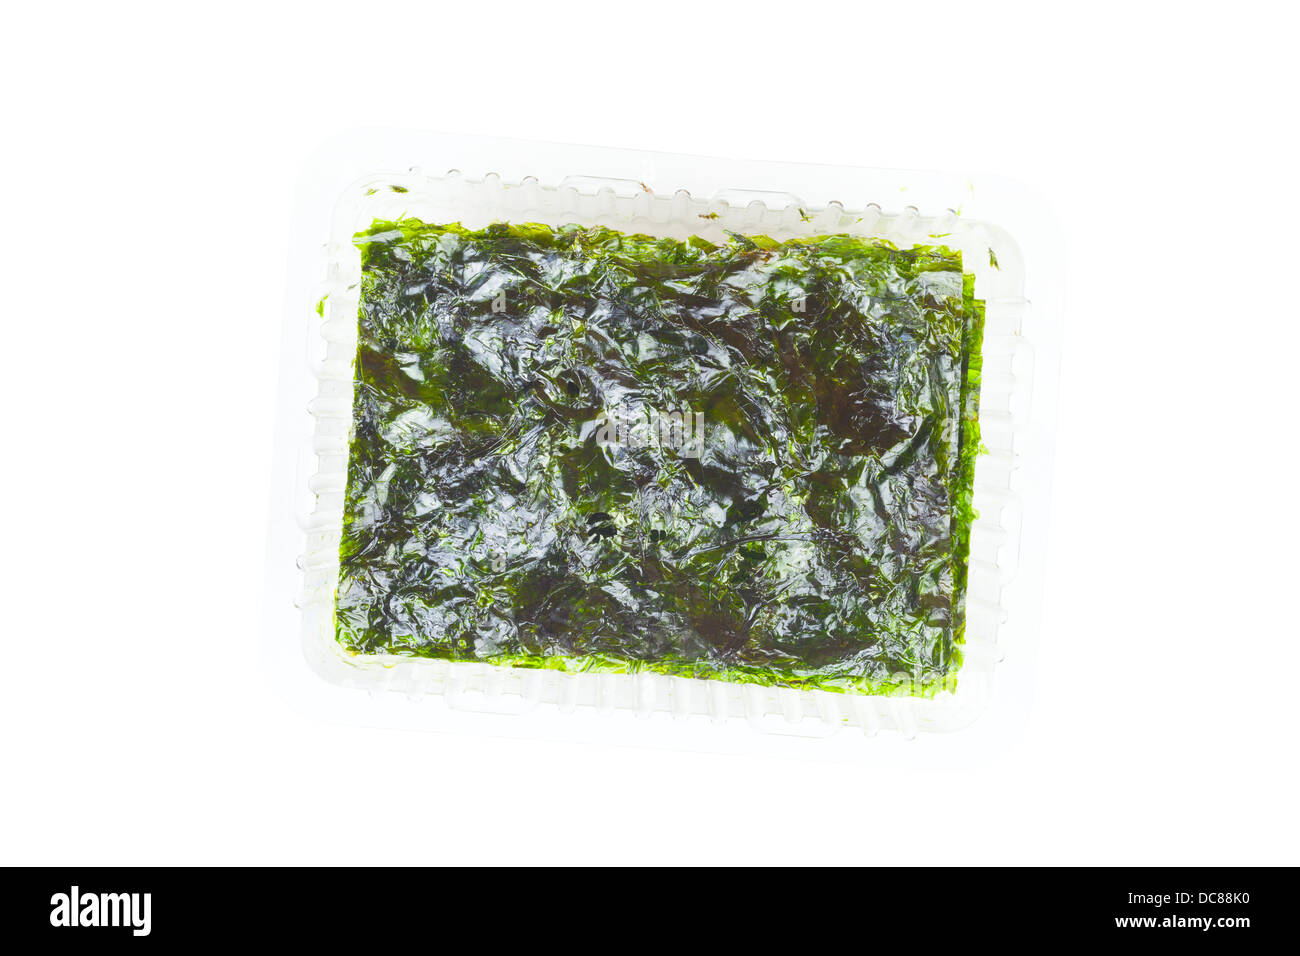 Ulva lactuca, seaweed or laver in a plastic container on a white background Stock Photo